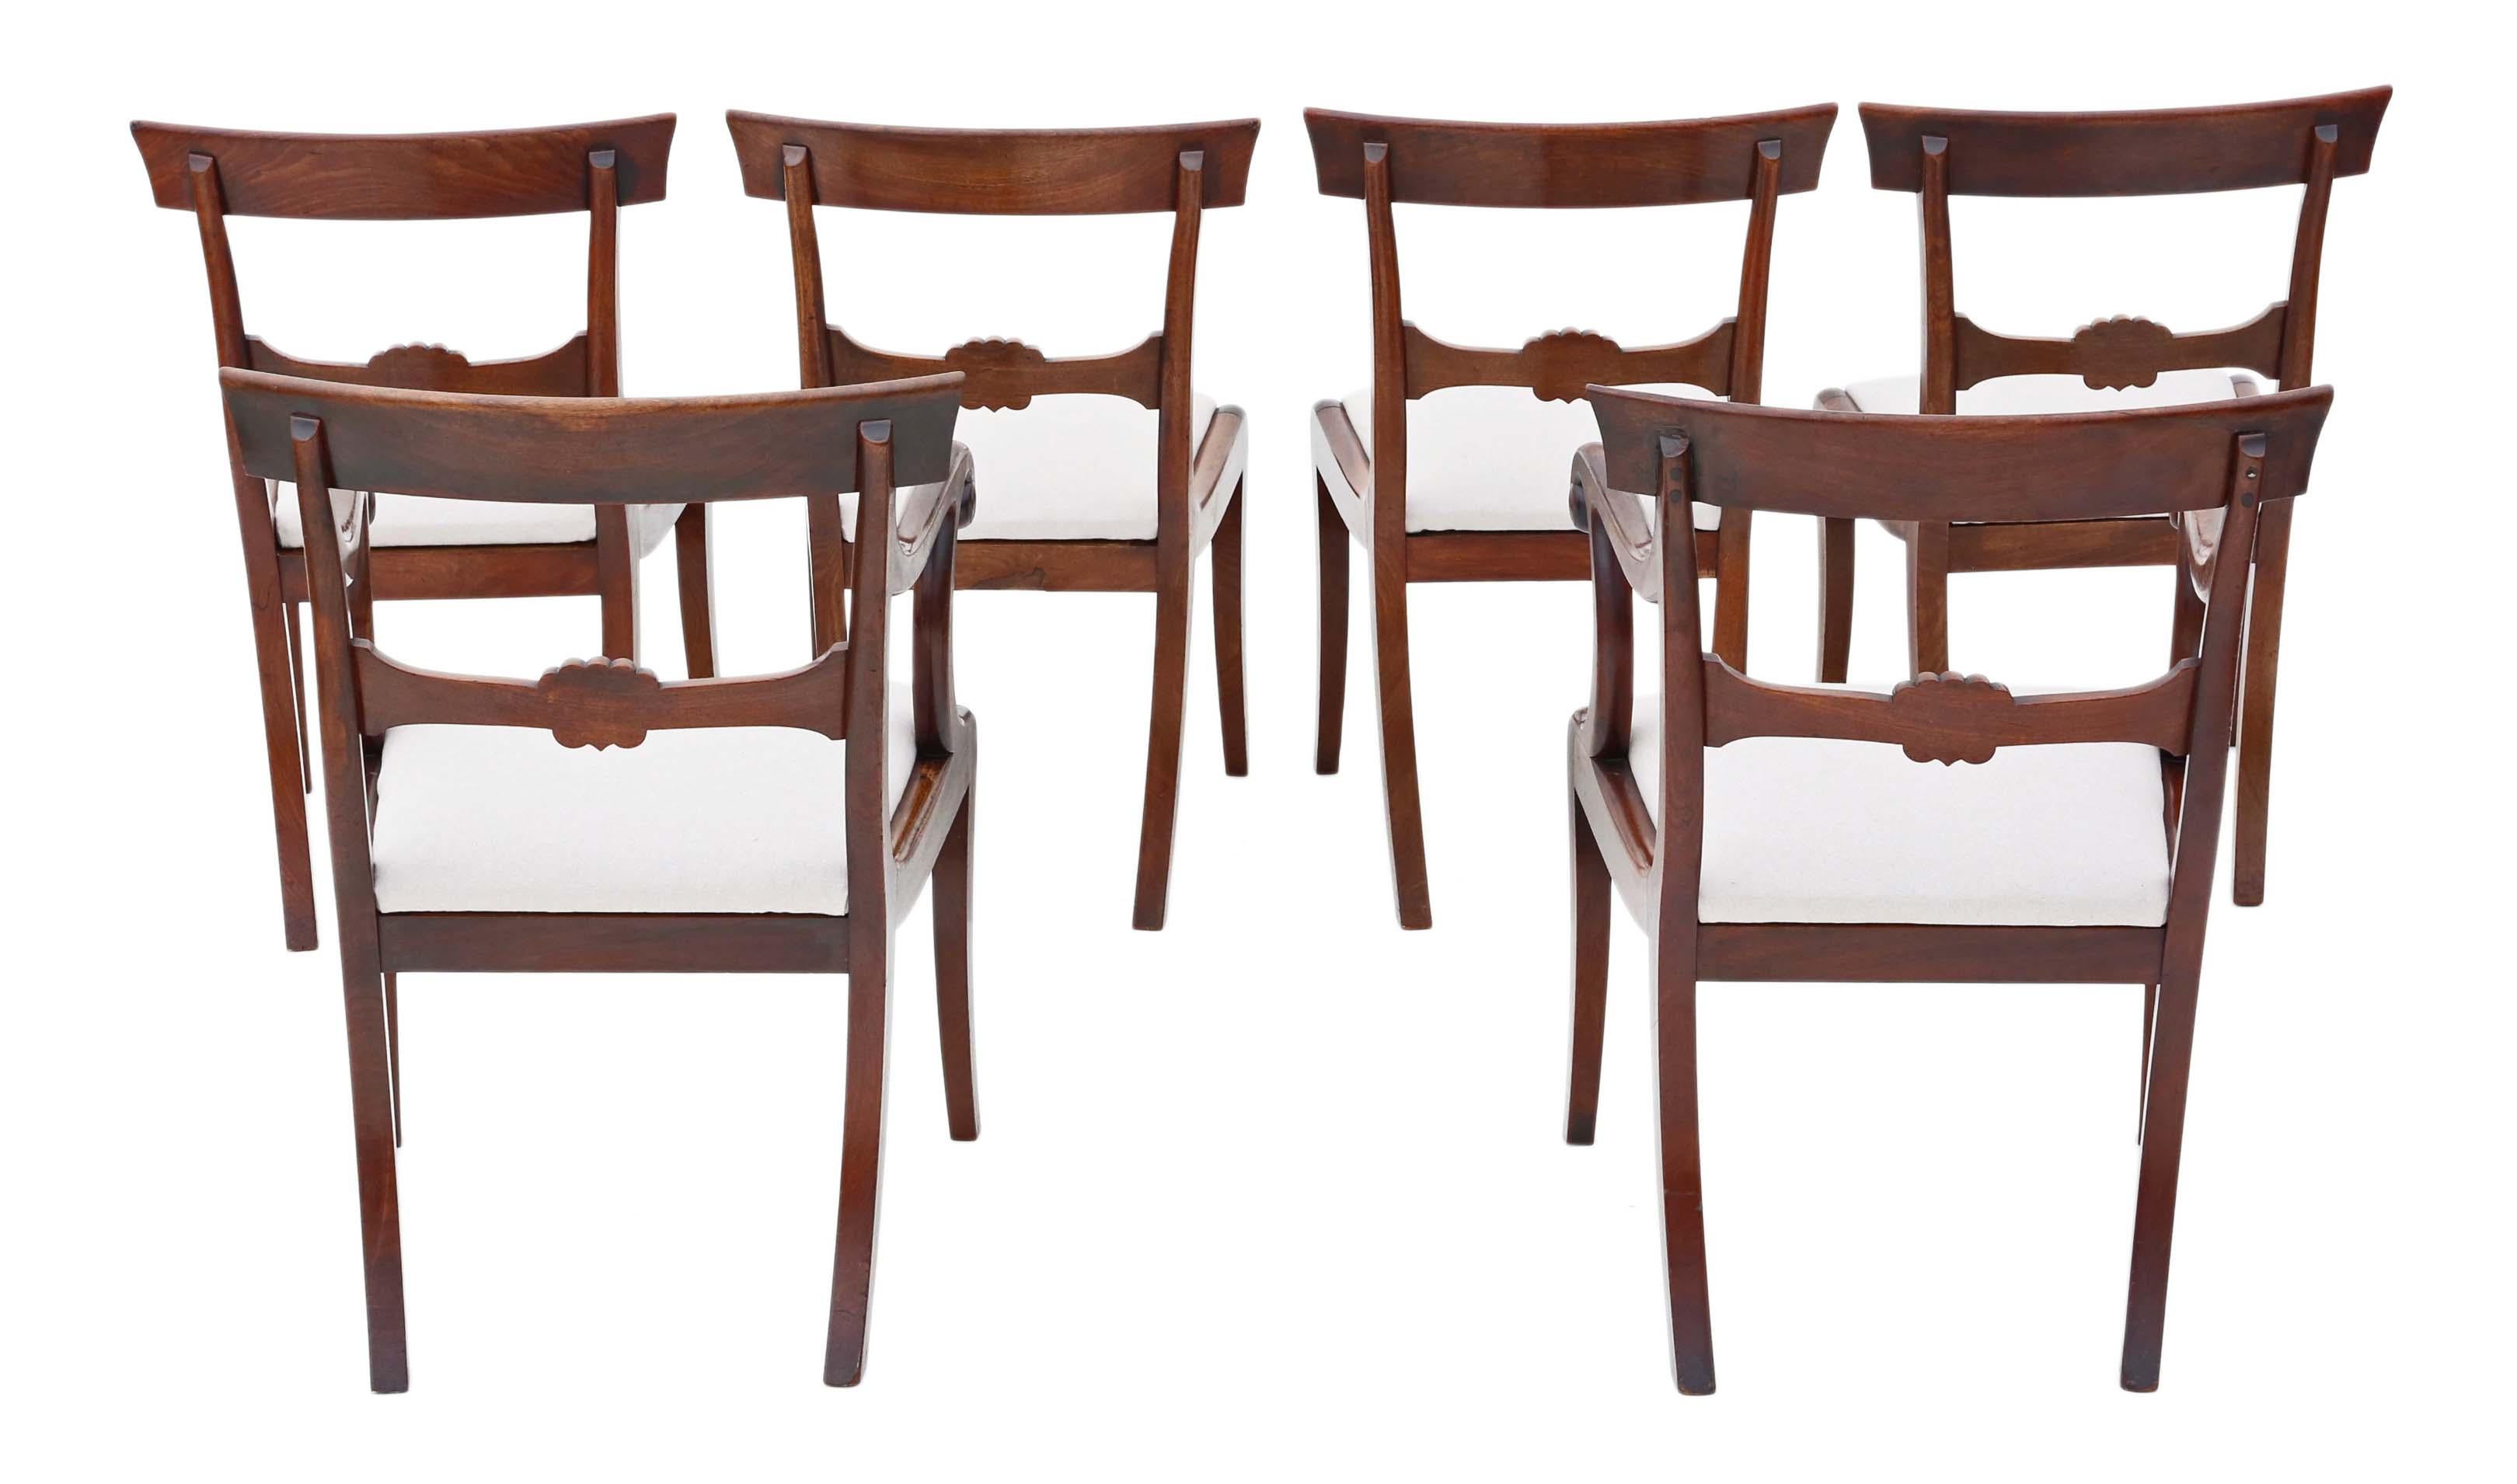 Regency Cuban Mahogany Dining Chairs: Set of 6 (4+2), Antique Quality, C1825 In Good Condition For Sale In Wisbech, Cambridgeshire